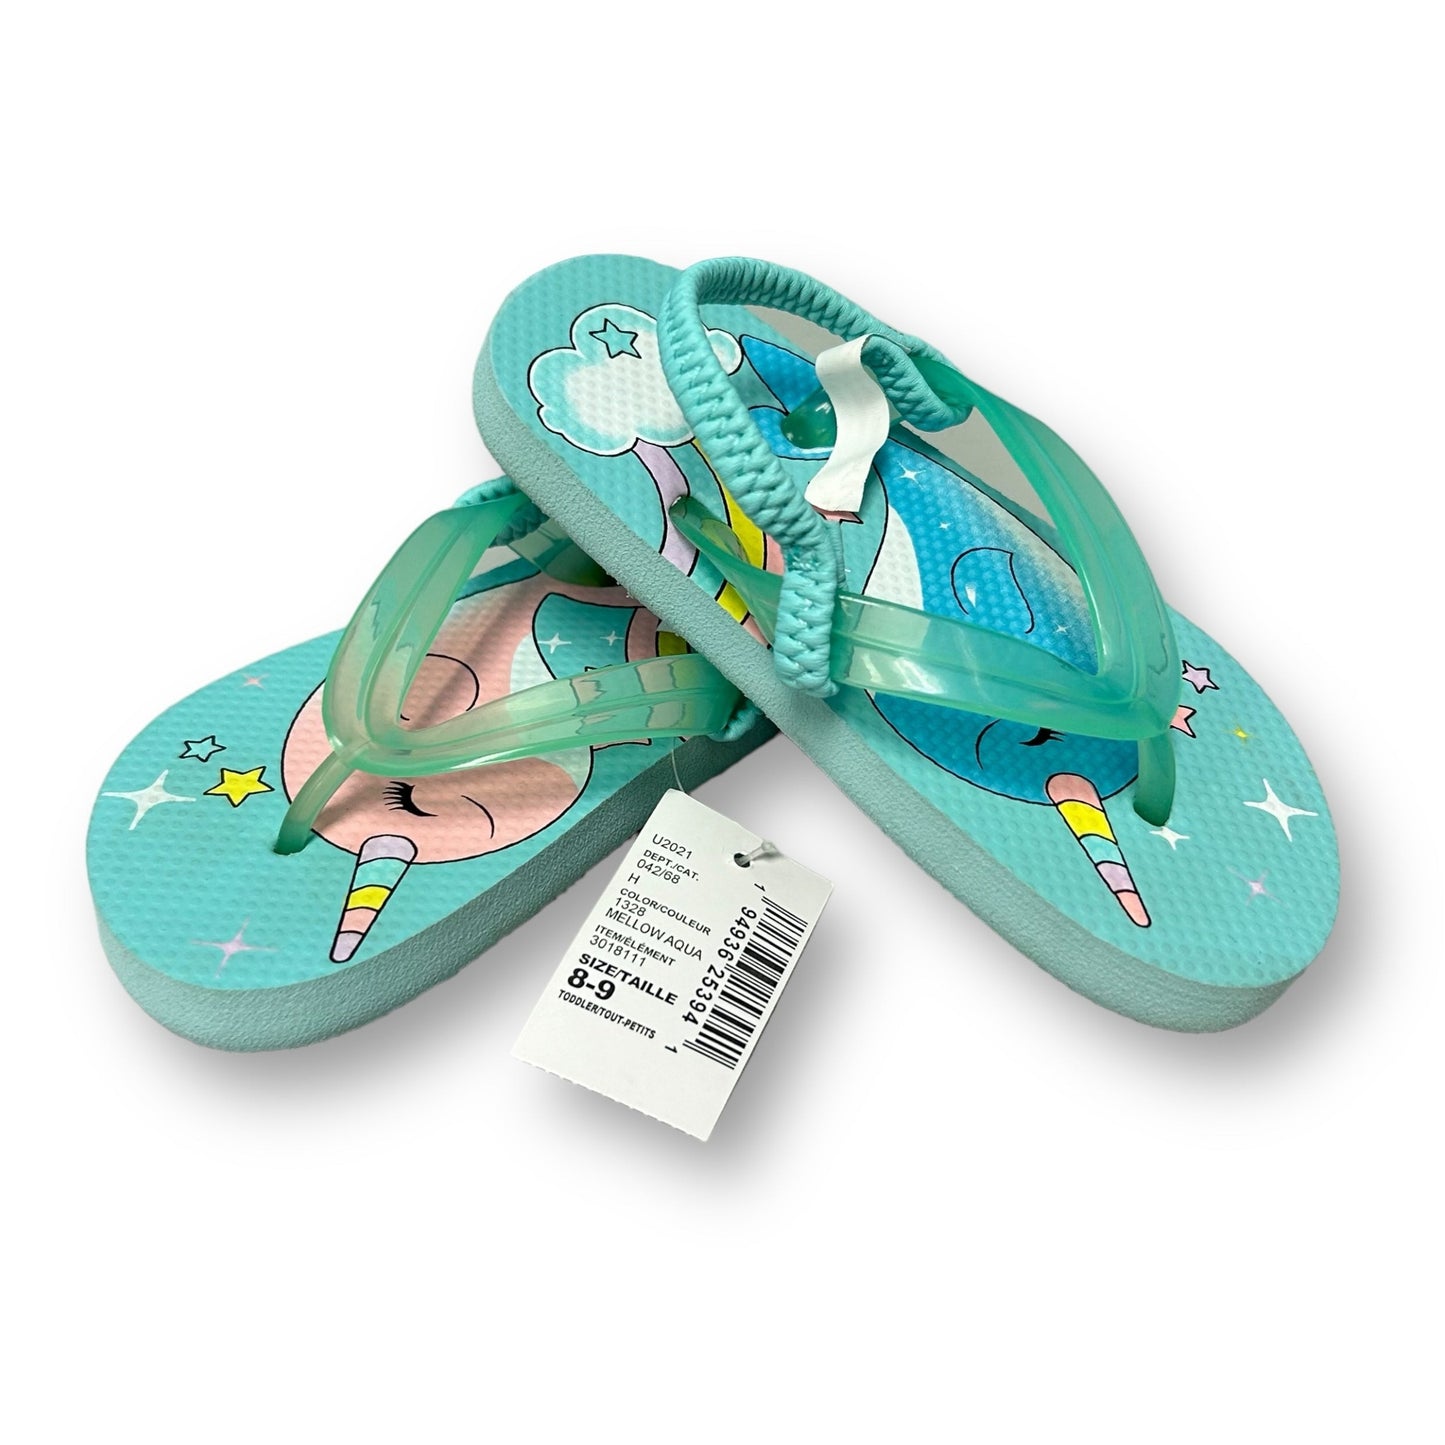 NEW! Children's Place Toddler Girl Size 8/9 Turquoise Narwhal Thong Sandals